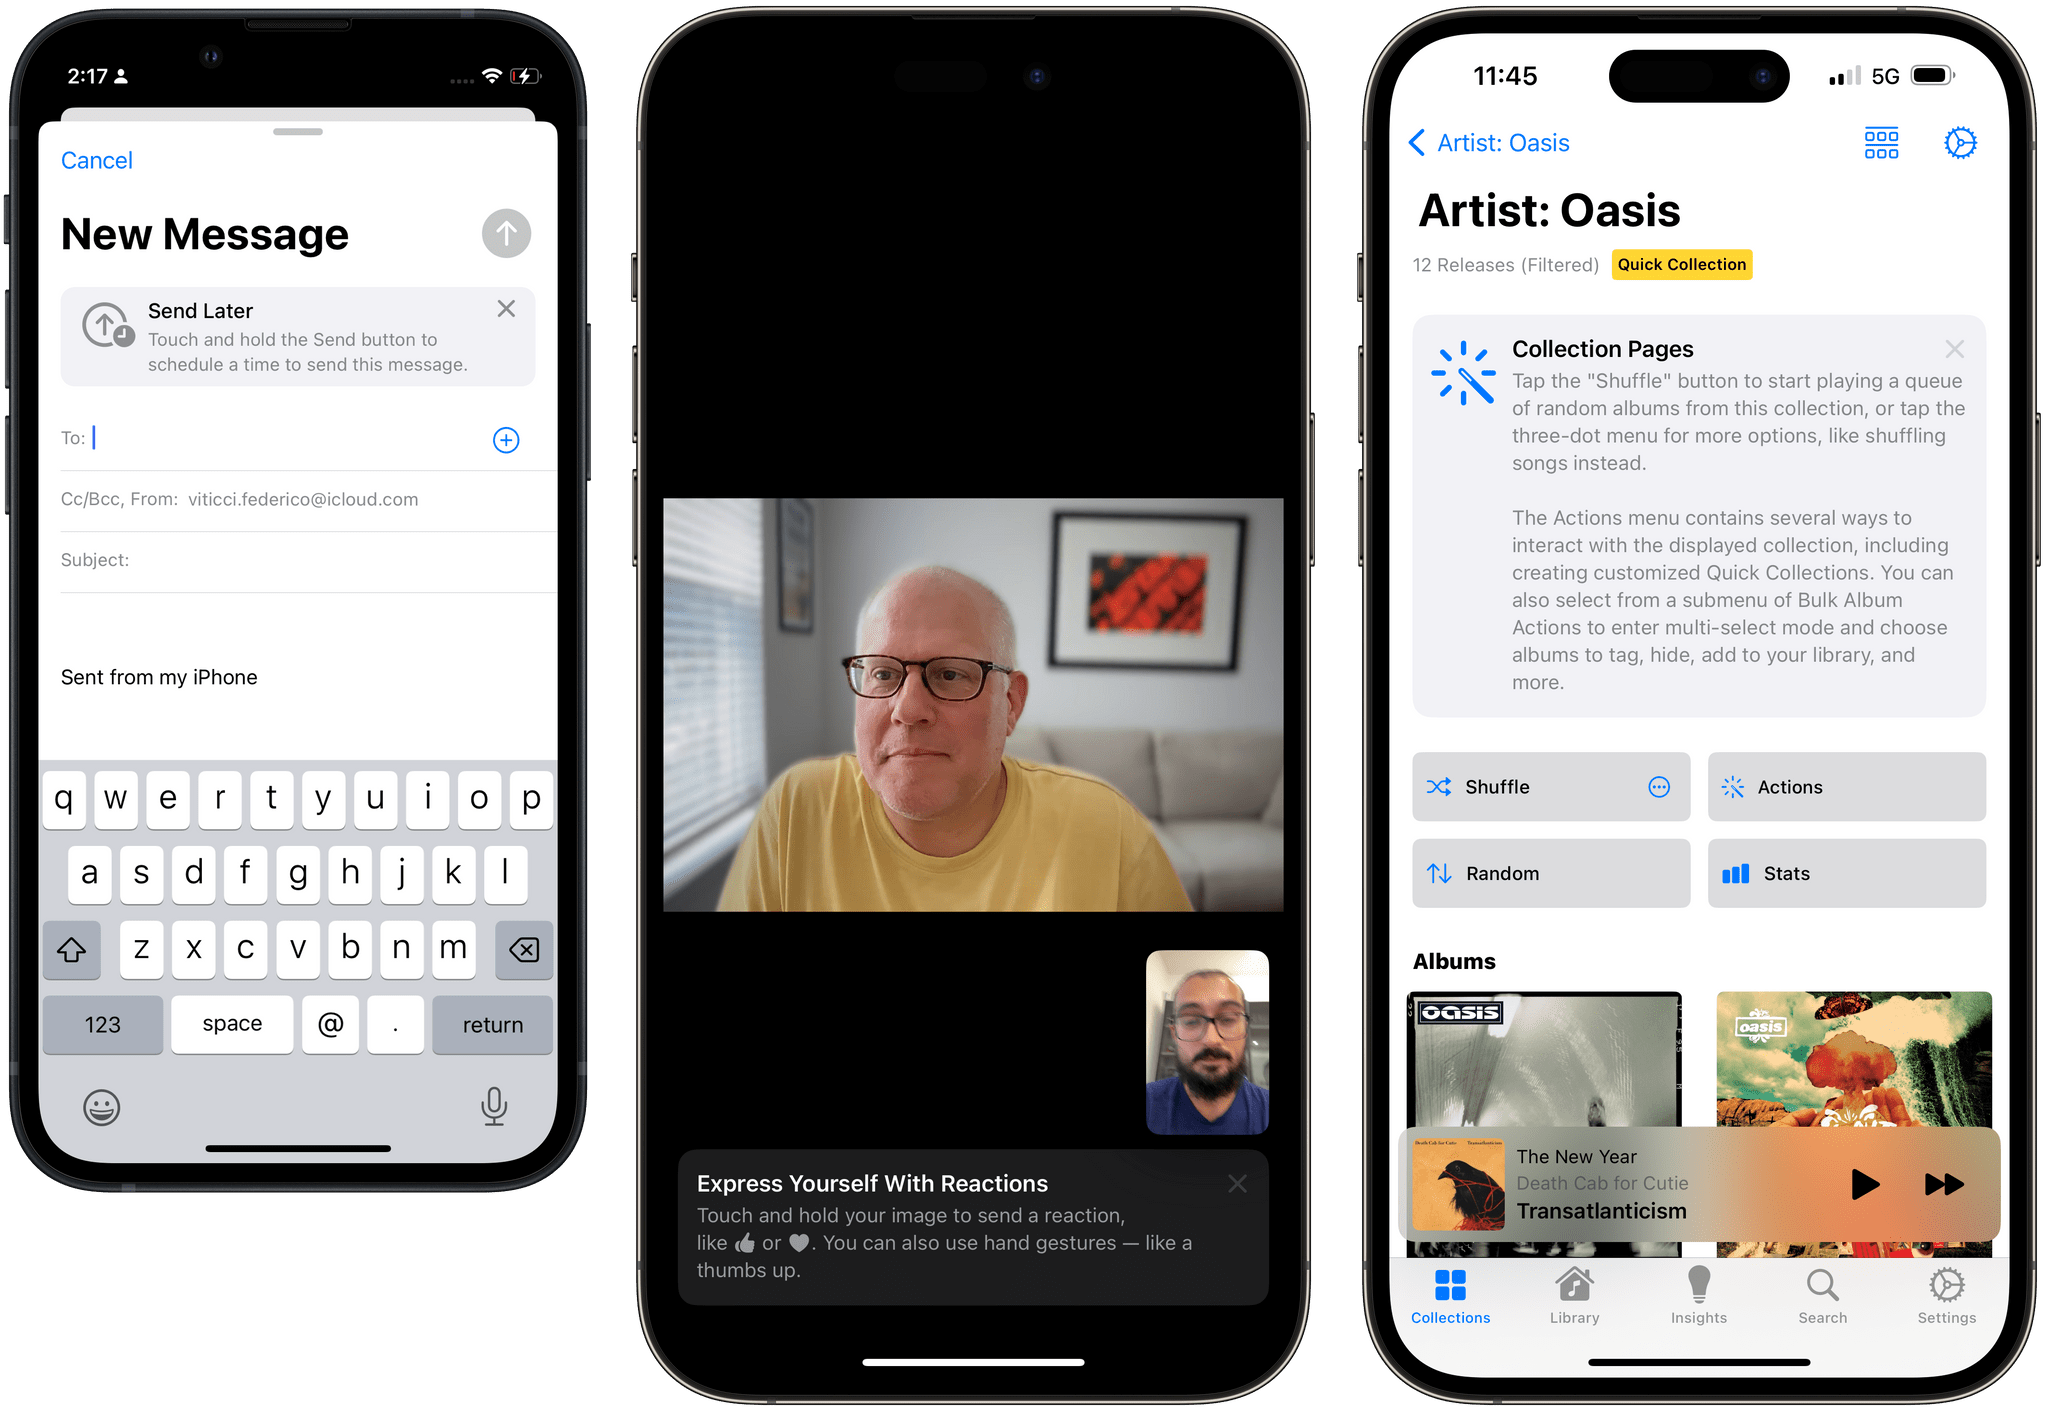 Different styles of TipKit-powered messages in Mail, FaceTime, and Albums.